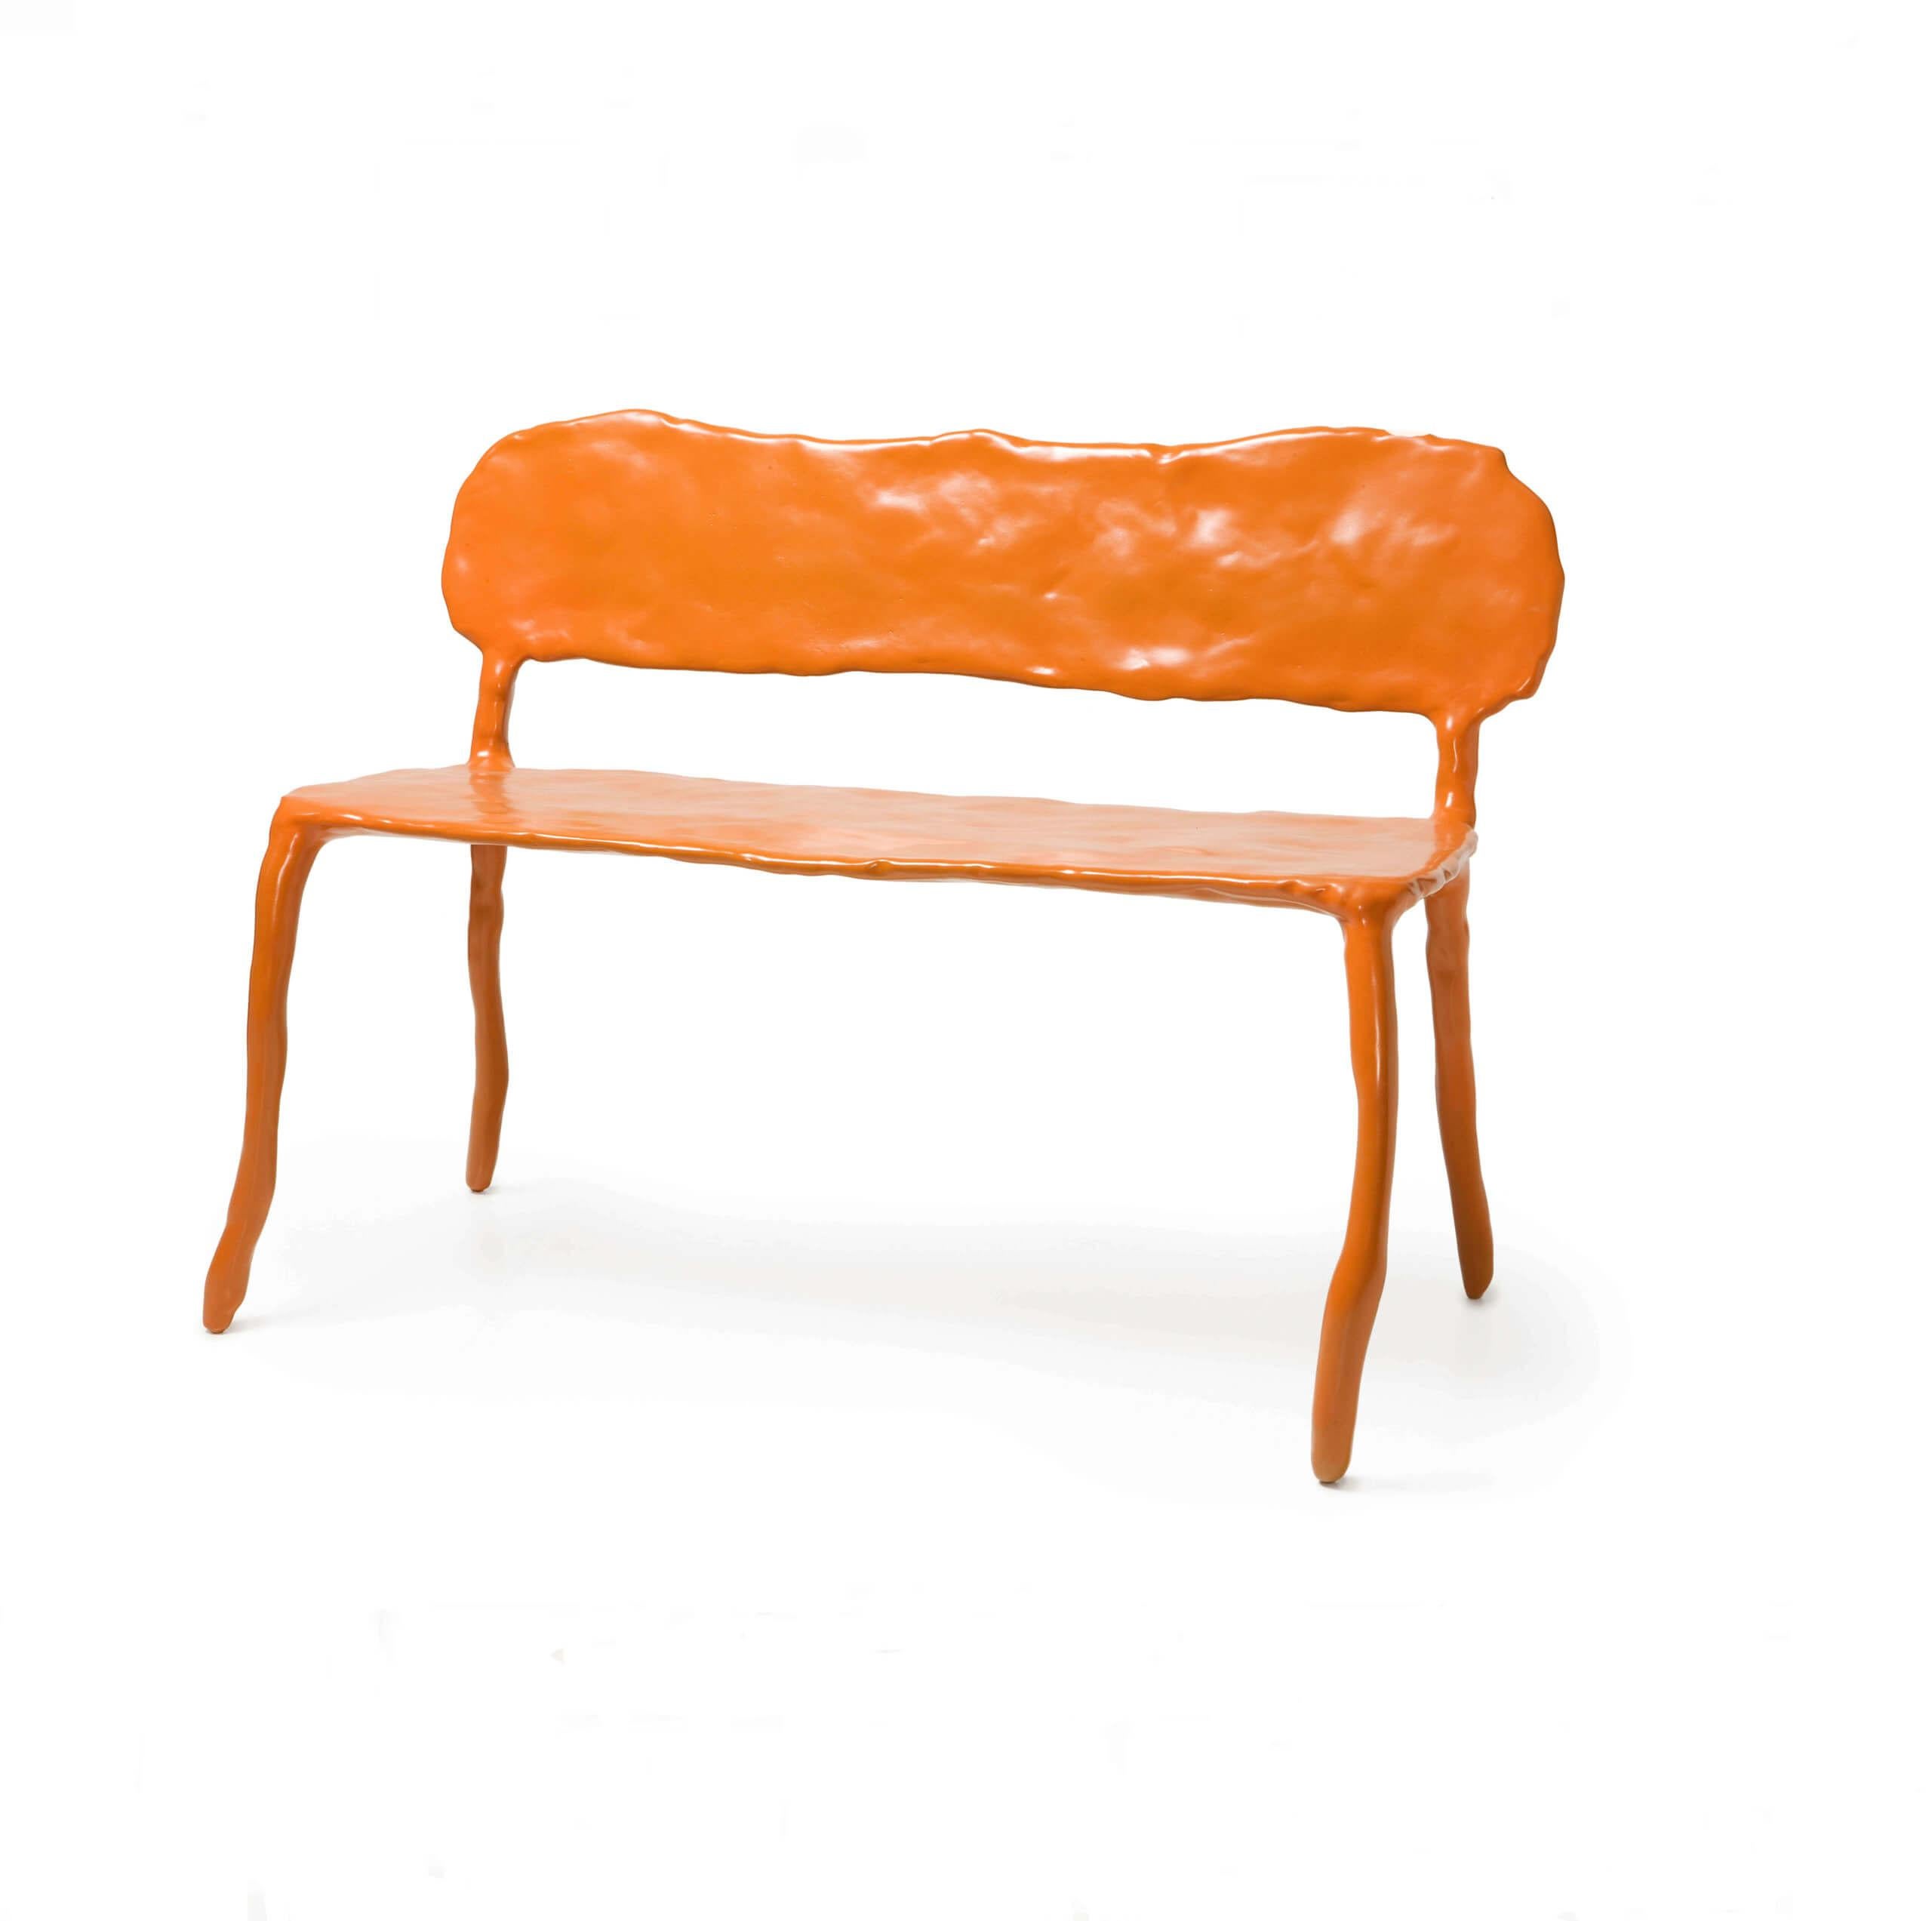 Contemporary Clay Bench by Maarten Baas In New Condition For Sale In Warsaw, PL